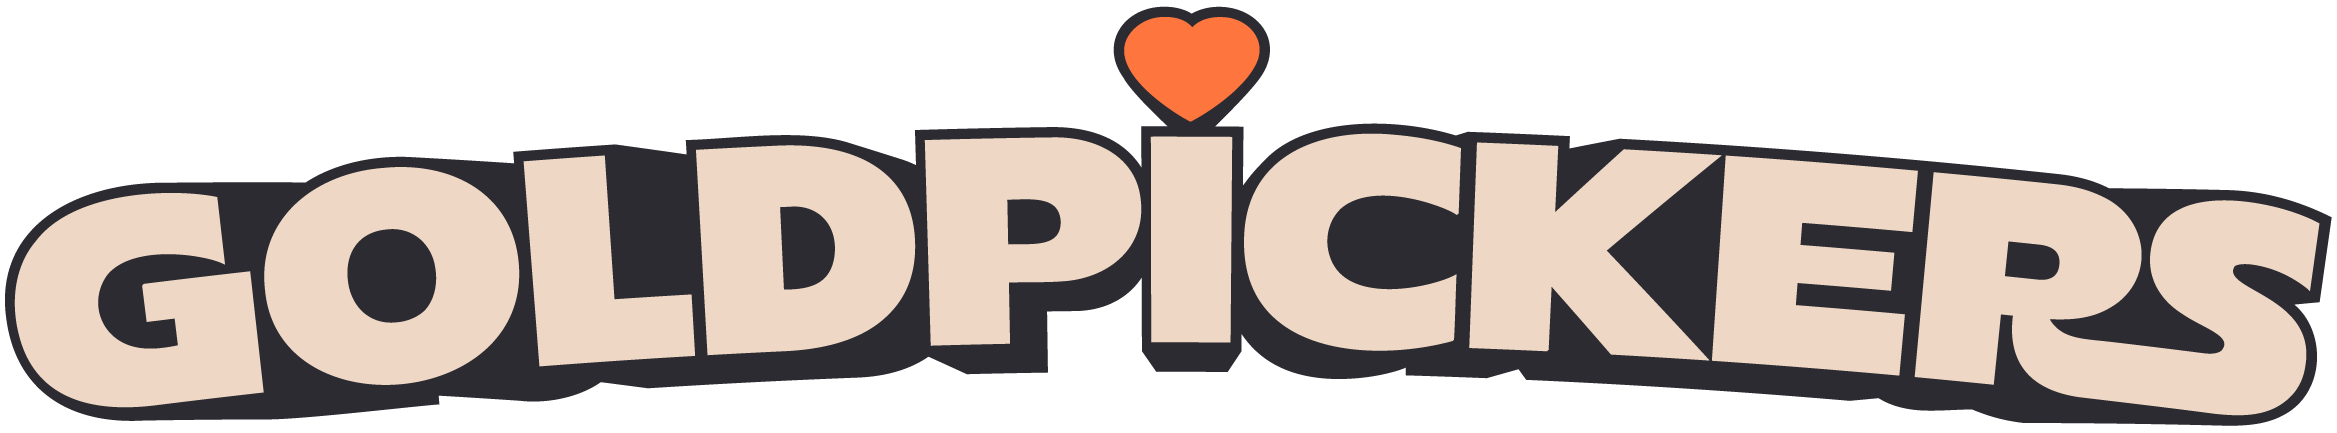 Logo of Goldpickers featuring bold, stylized letters in a gradient of beige to black with a small red heart above the letter 'I' in 'PICKERS'.